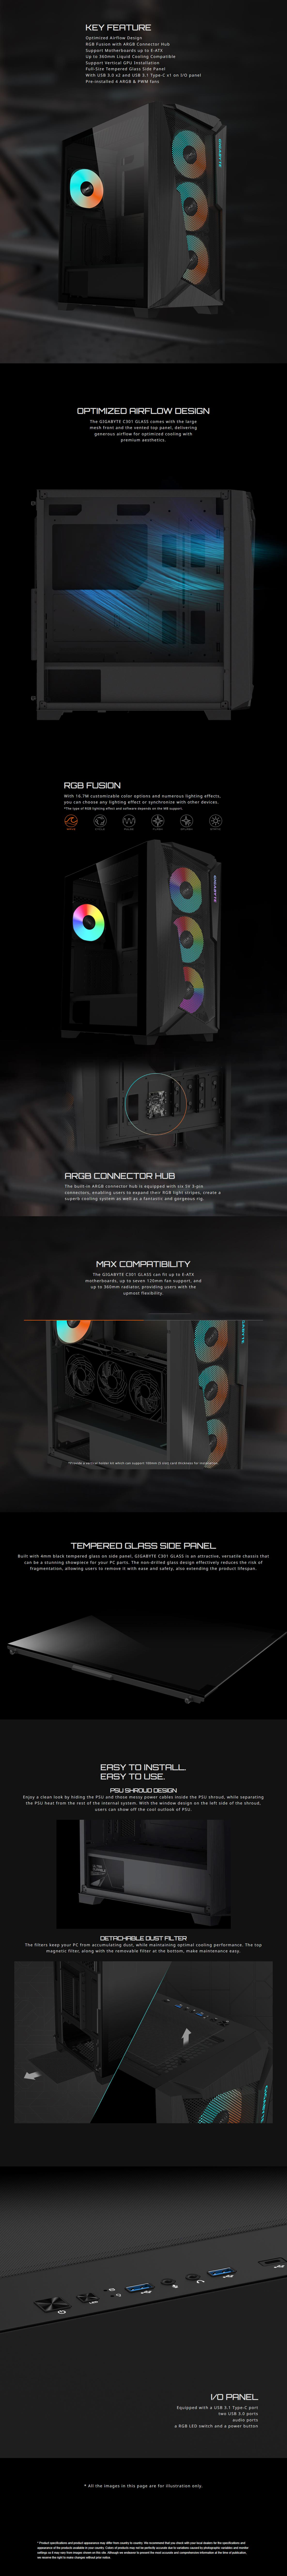 A large marketing image providing additional information about the product Gigabyte C301 Mid Tower Case - Black - Additional alt info not provided